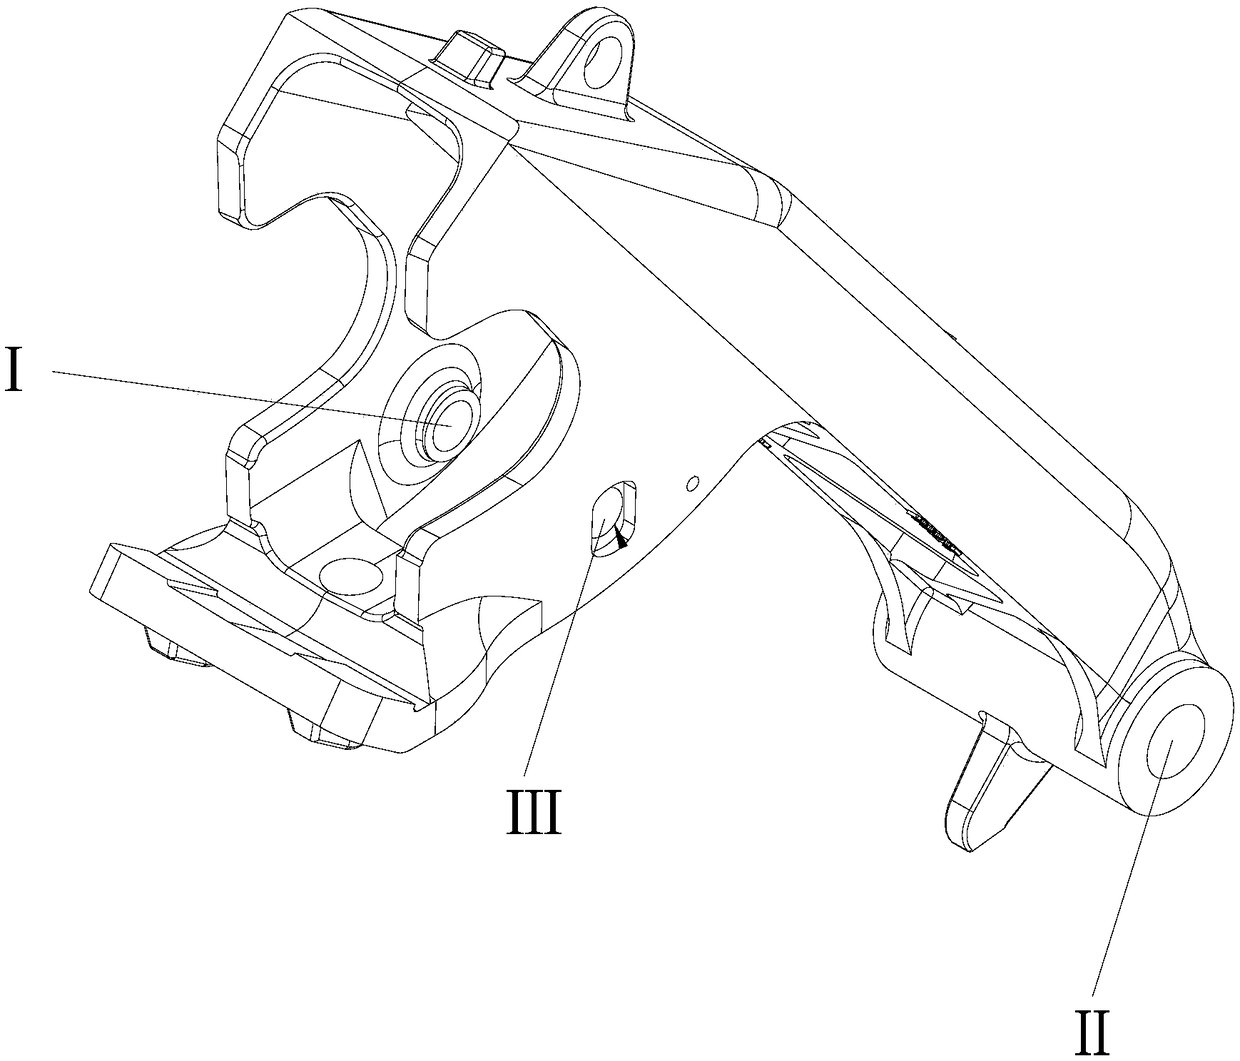 Machining tool and technology for small control arm